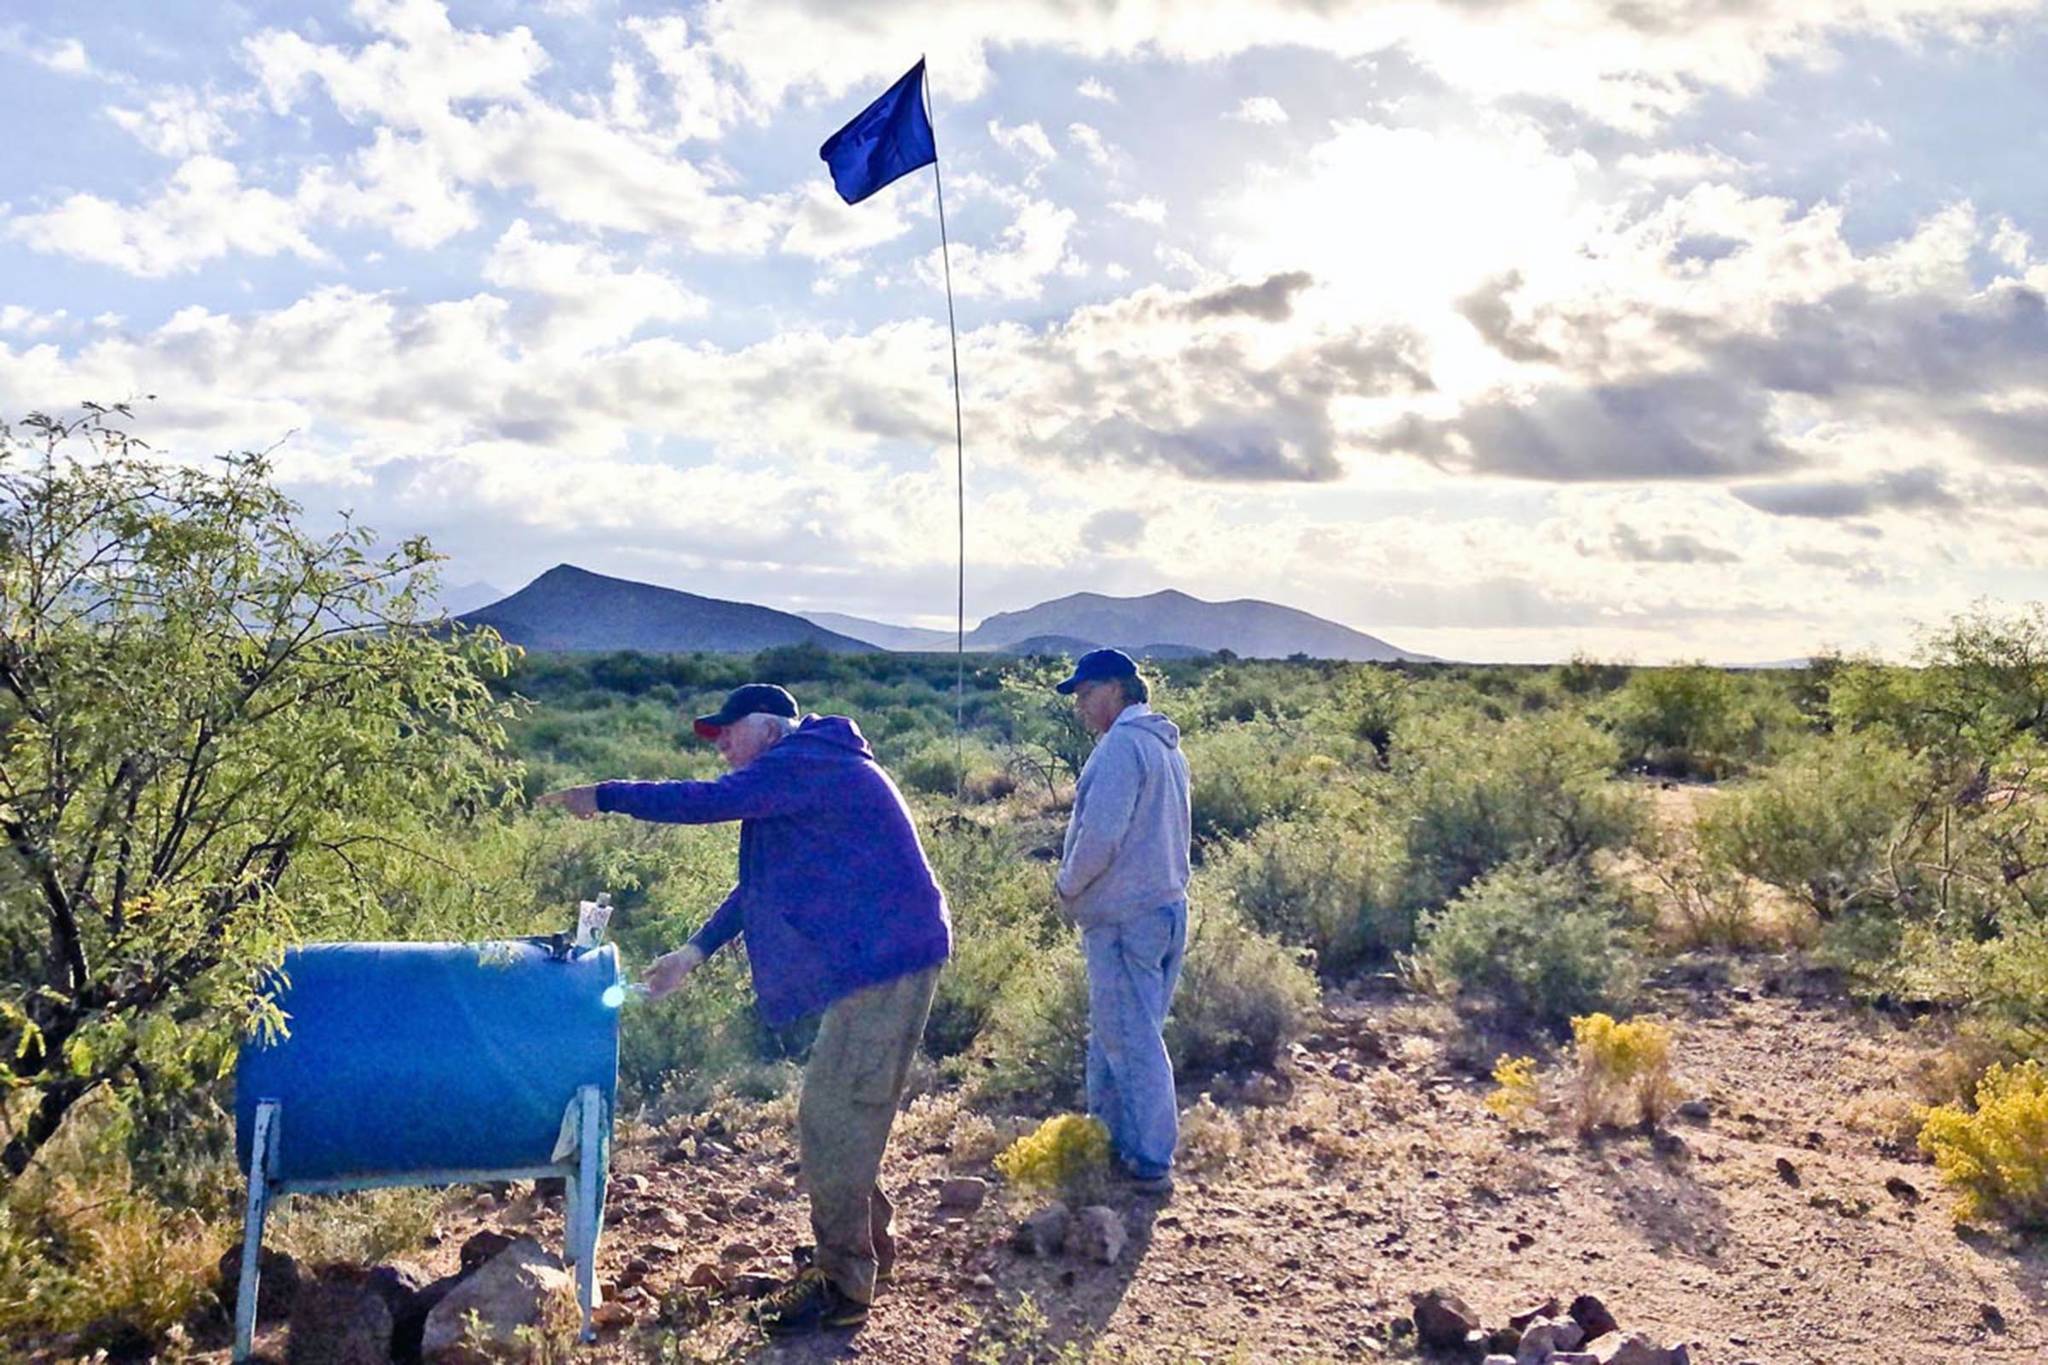 Ken Huse | Courtesy Photo                                Volunteers from Humane Borders, a charitable organization, fill a water drum in the Arizona desert for immigrants traveling the waste.